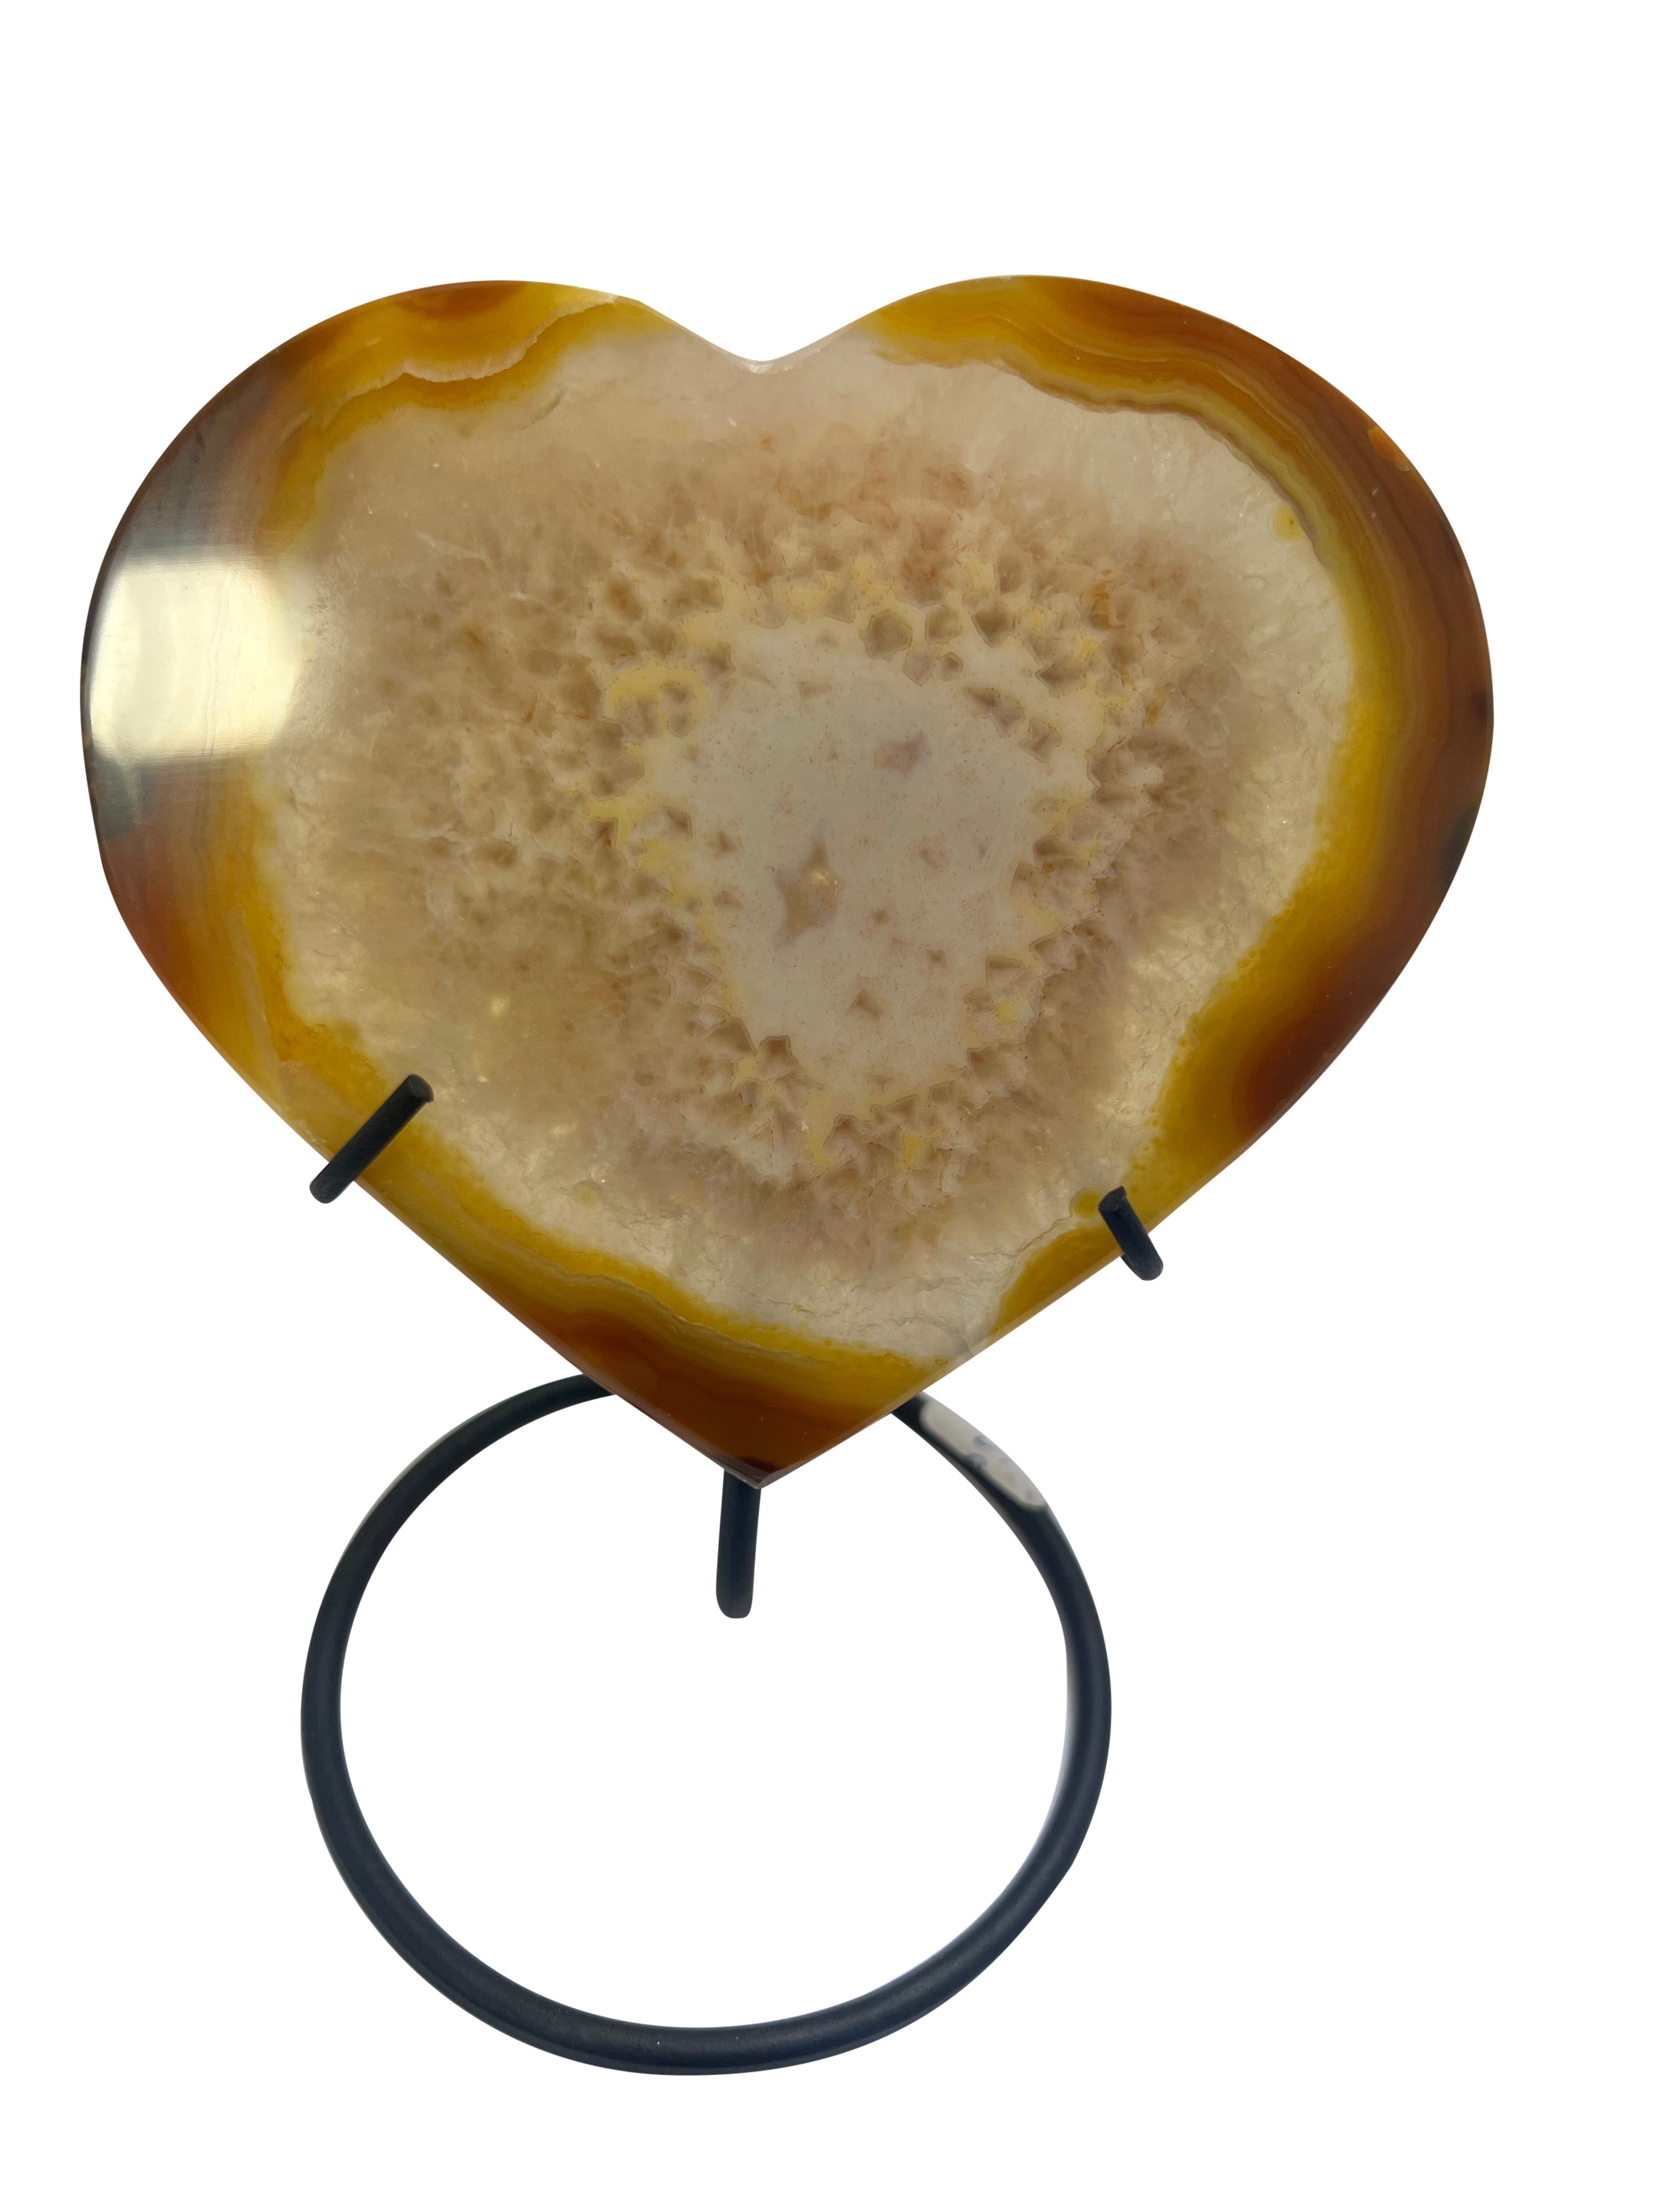 Heart Shaped Agate Slice on Stand - Model A